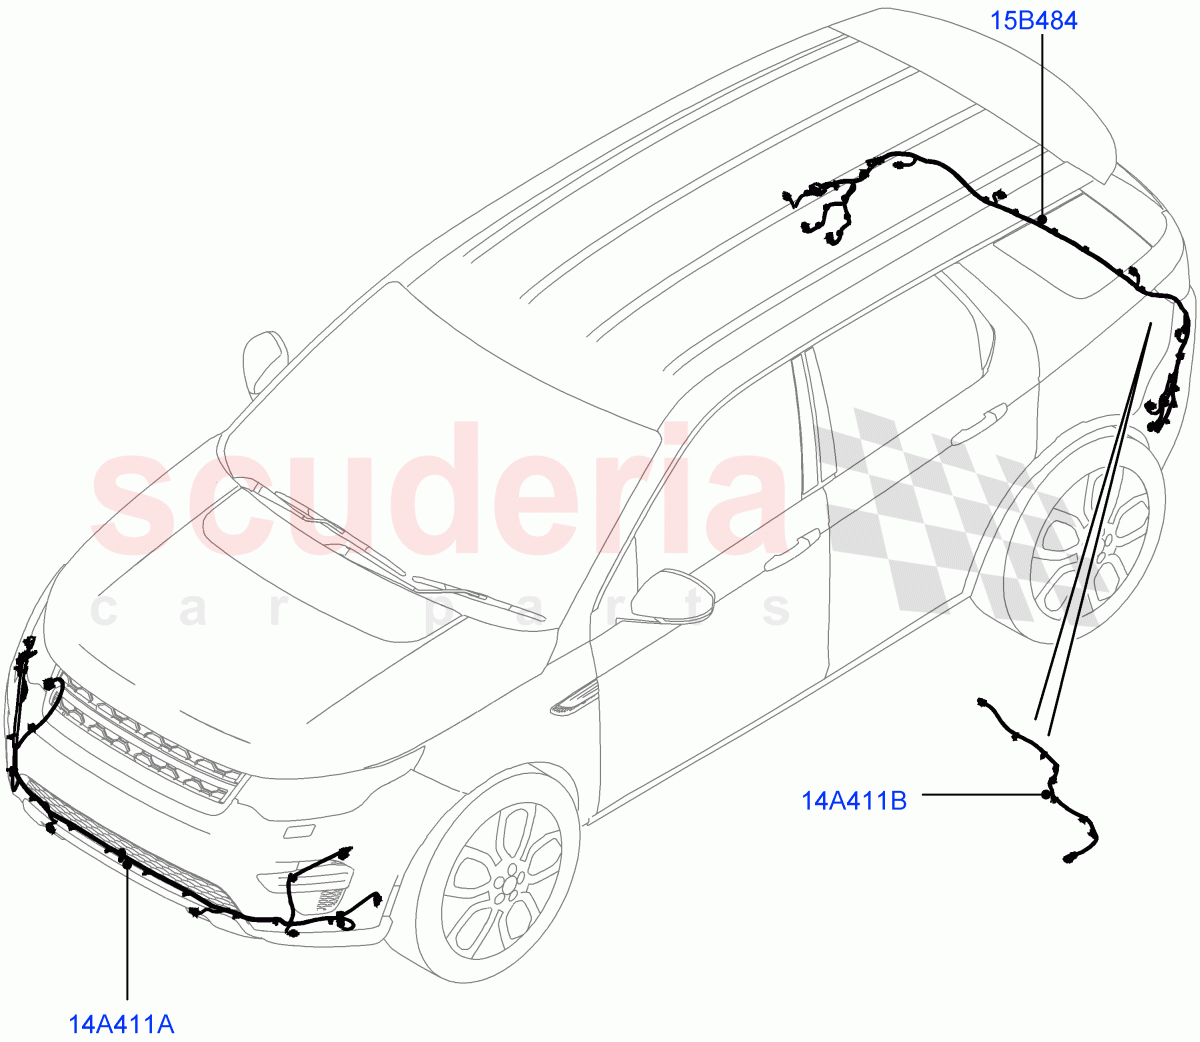 Electrical Wiring - Body And Rear(Bumper)(Halewood (UK)) of Land Rover Land Rover Discovery Sport (2015+) [2.0 Turbo Petrol AJ200P]